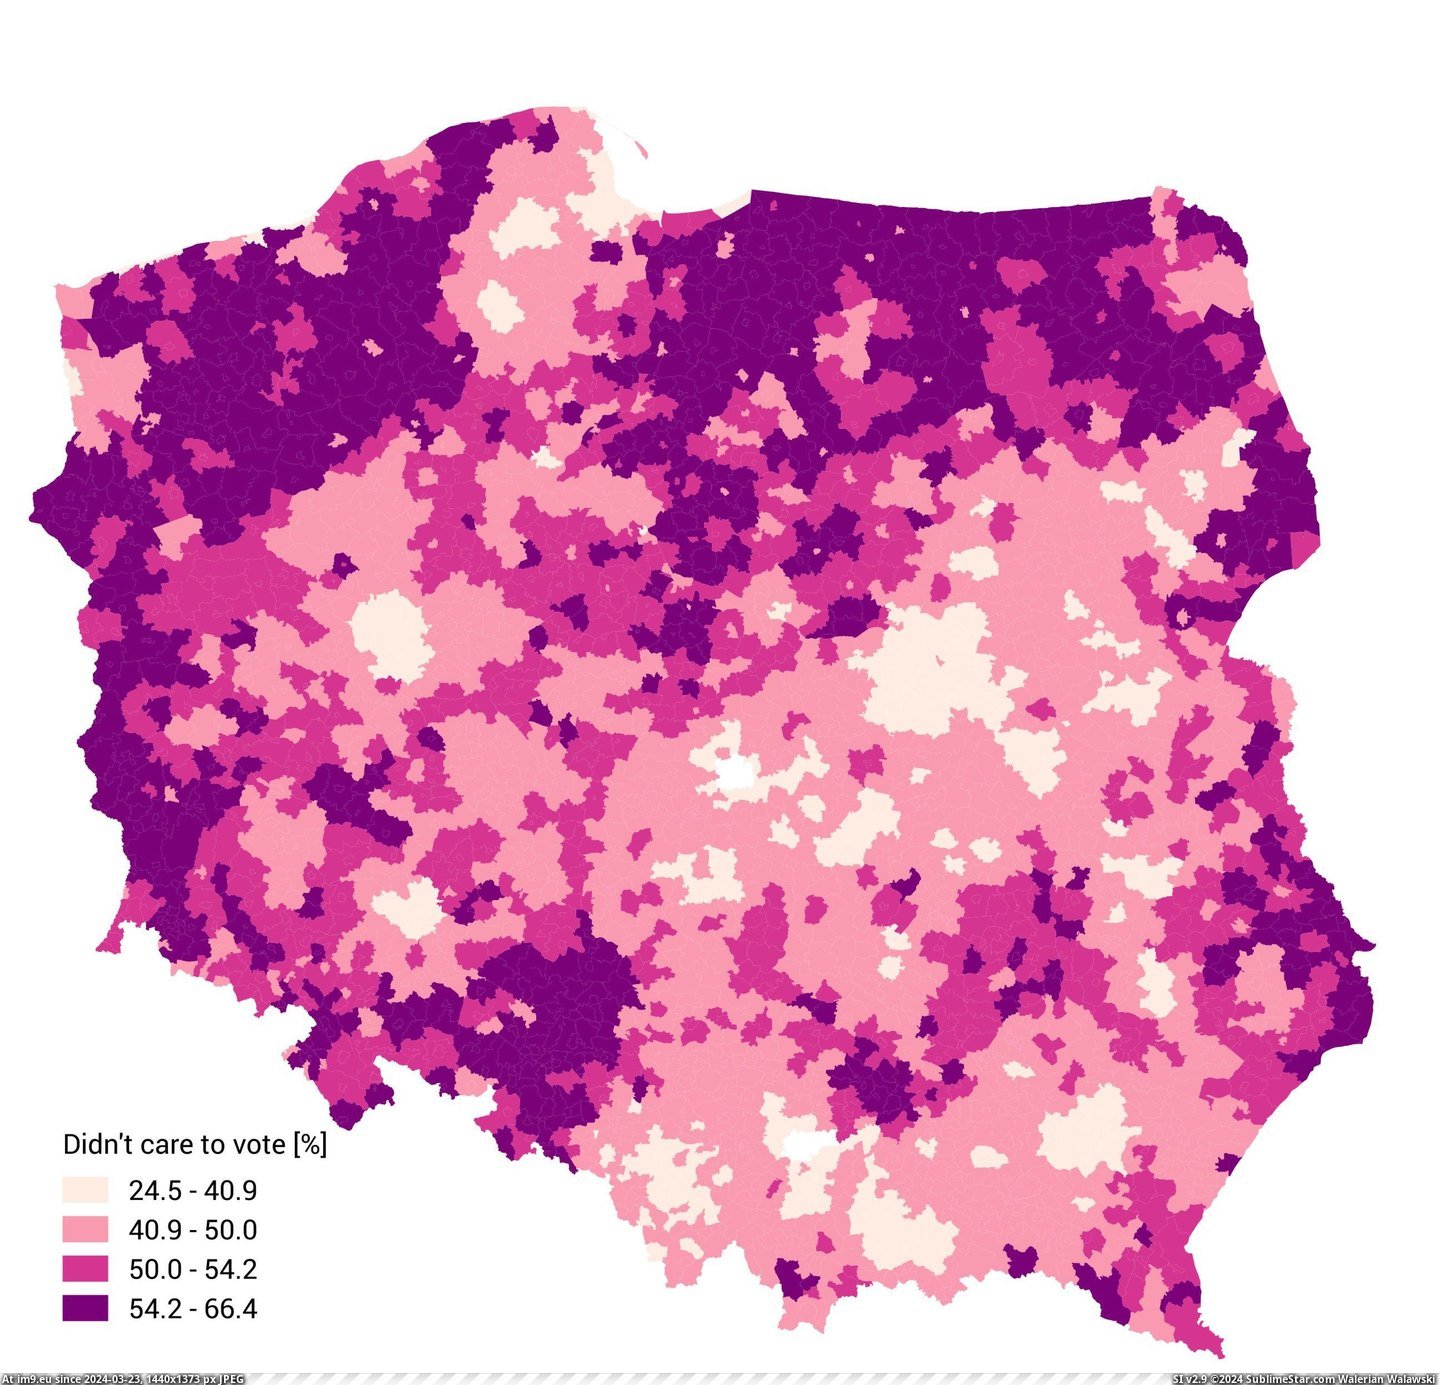 #One #Real #Party #Election #Winner #Sunday #Care #Poland [Mapporn] The real winner of Sunday's election in Poland - No One of the 'I don't care' Party [2589x2480px] Pic. (Изображение из альбом My r/MAPS favs))